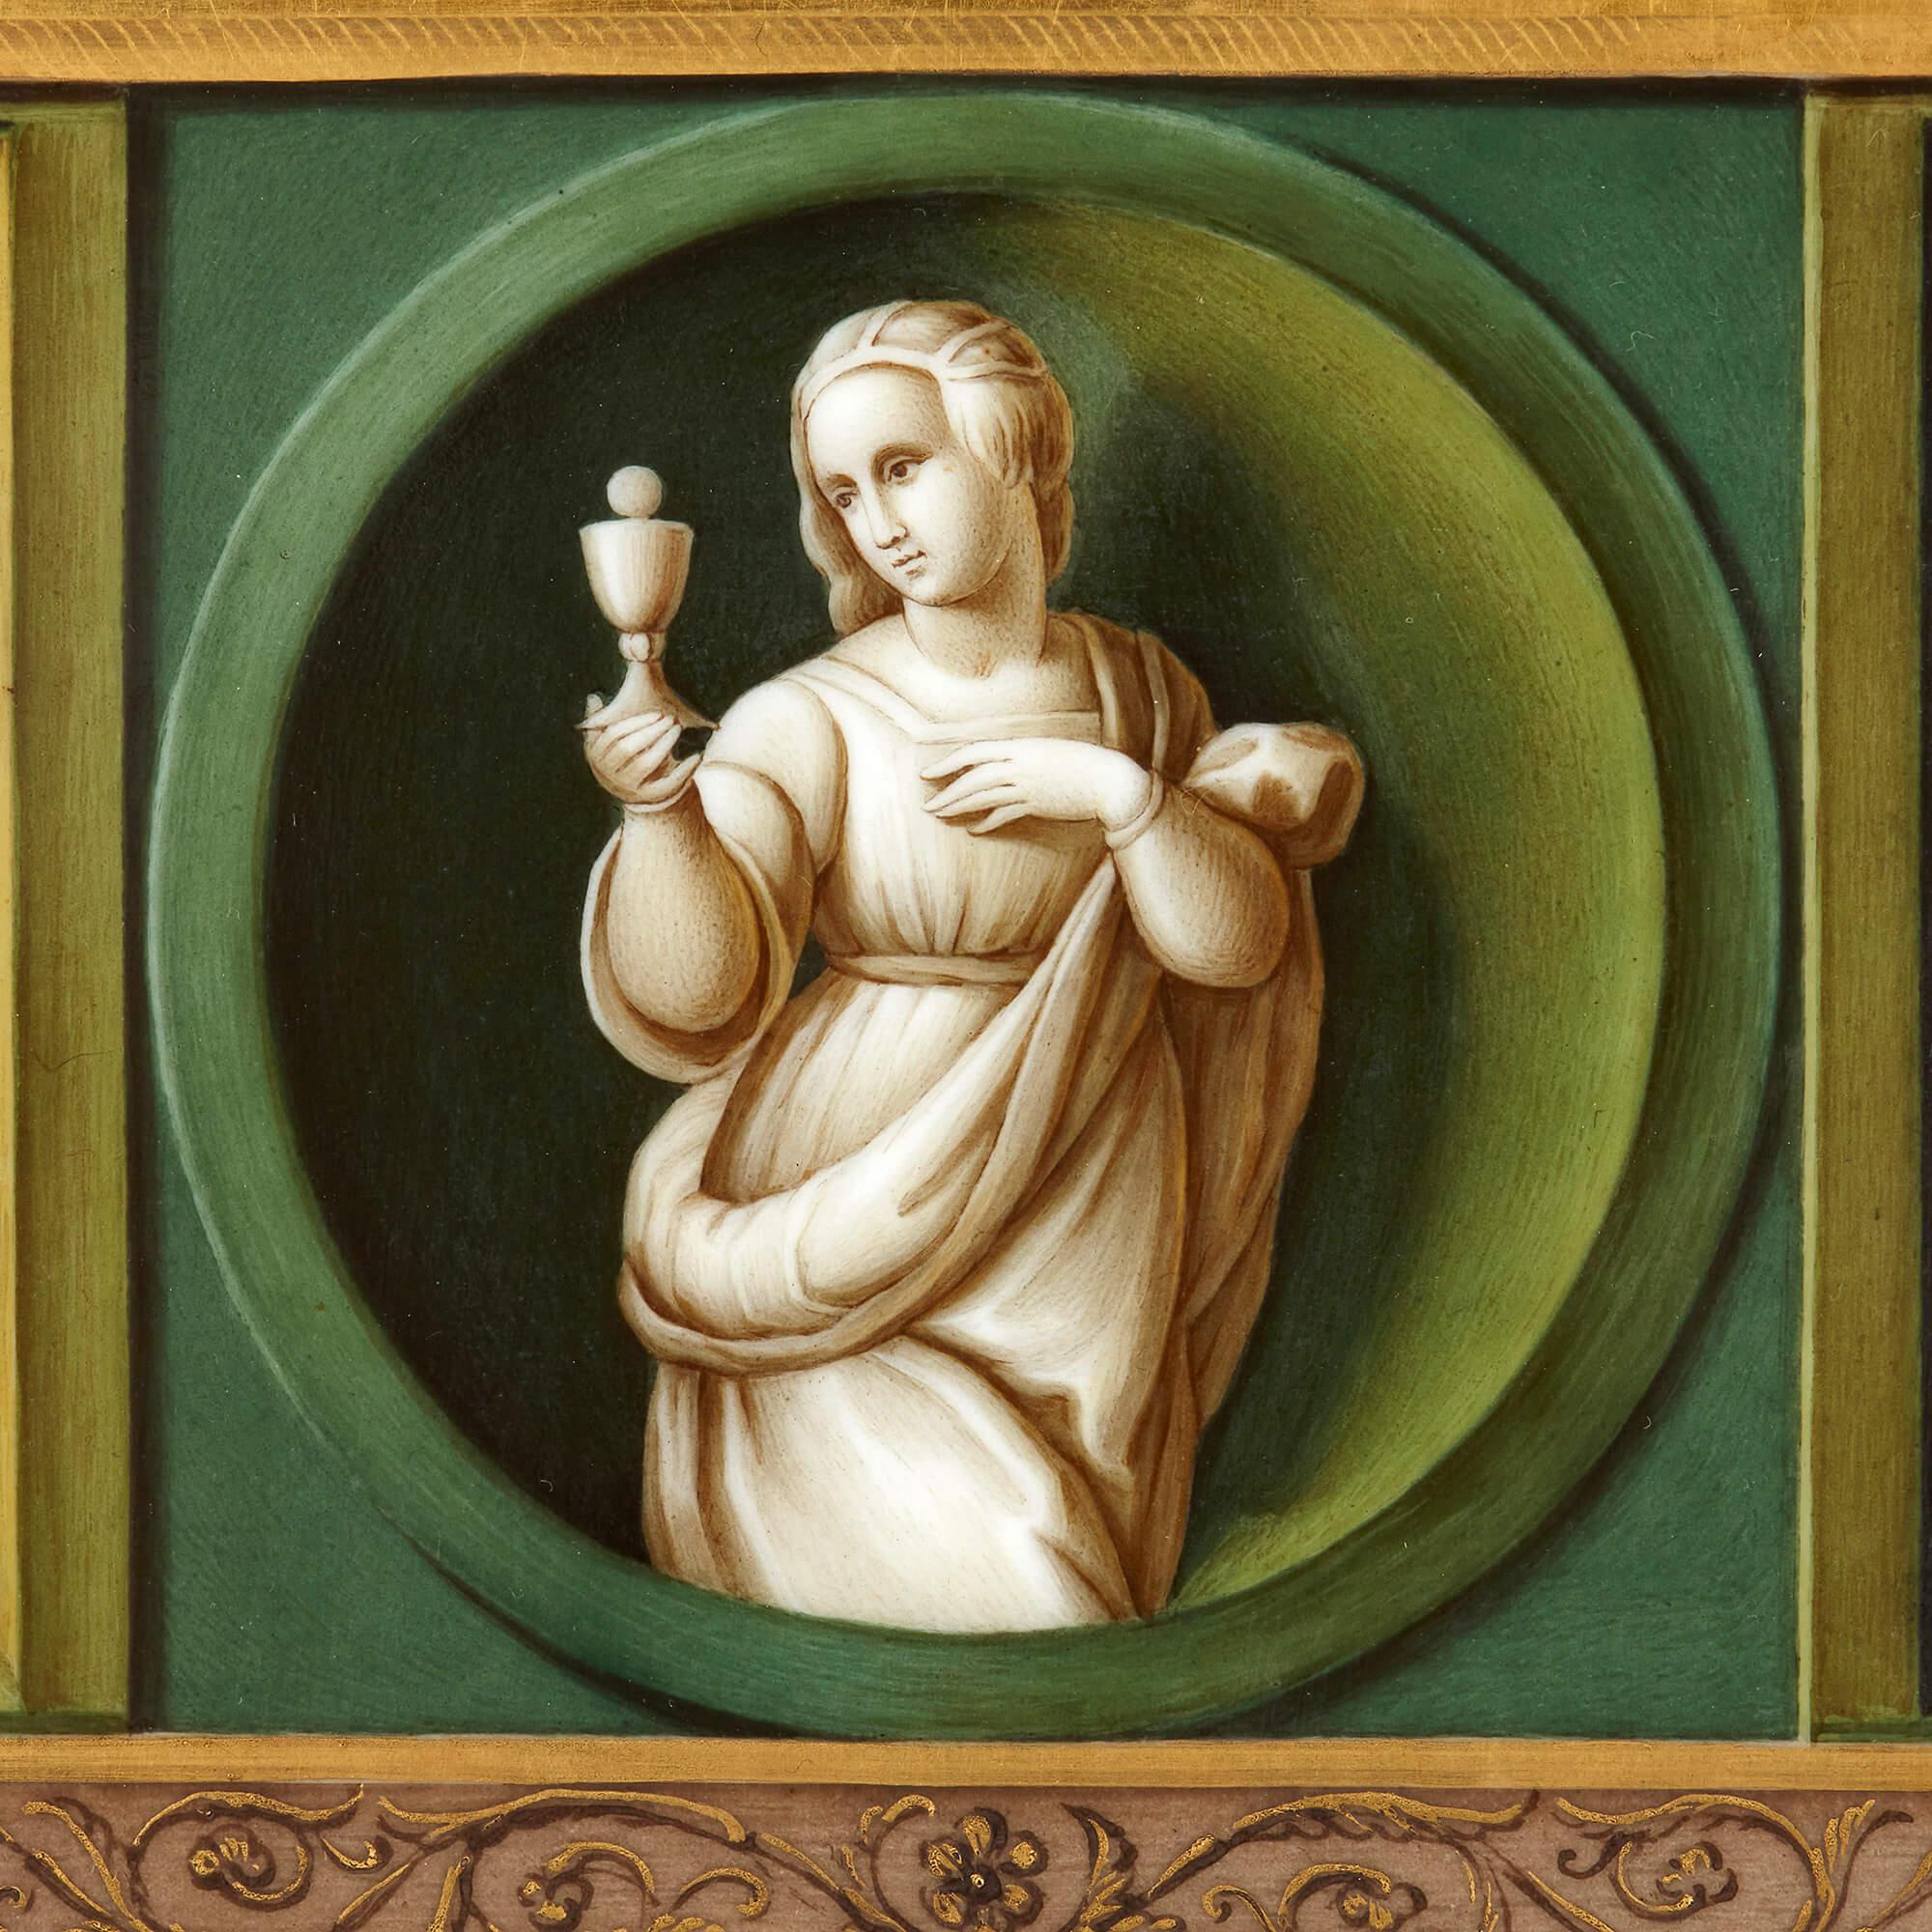 This fine porcelain plaque is decorated after part of a famous work by the Italian Renaissance artist Raphael (1483-1520). The original work, an alterpiece known as the 'Pala Baglioni', was commissioned by Florentine noblewoman Atalanta